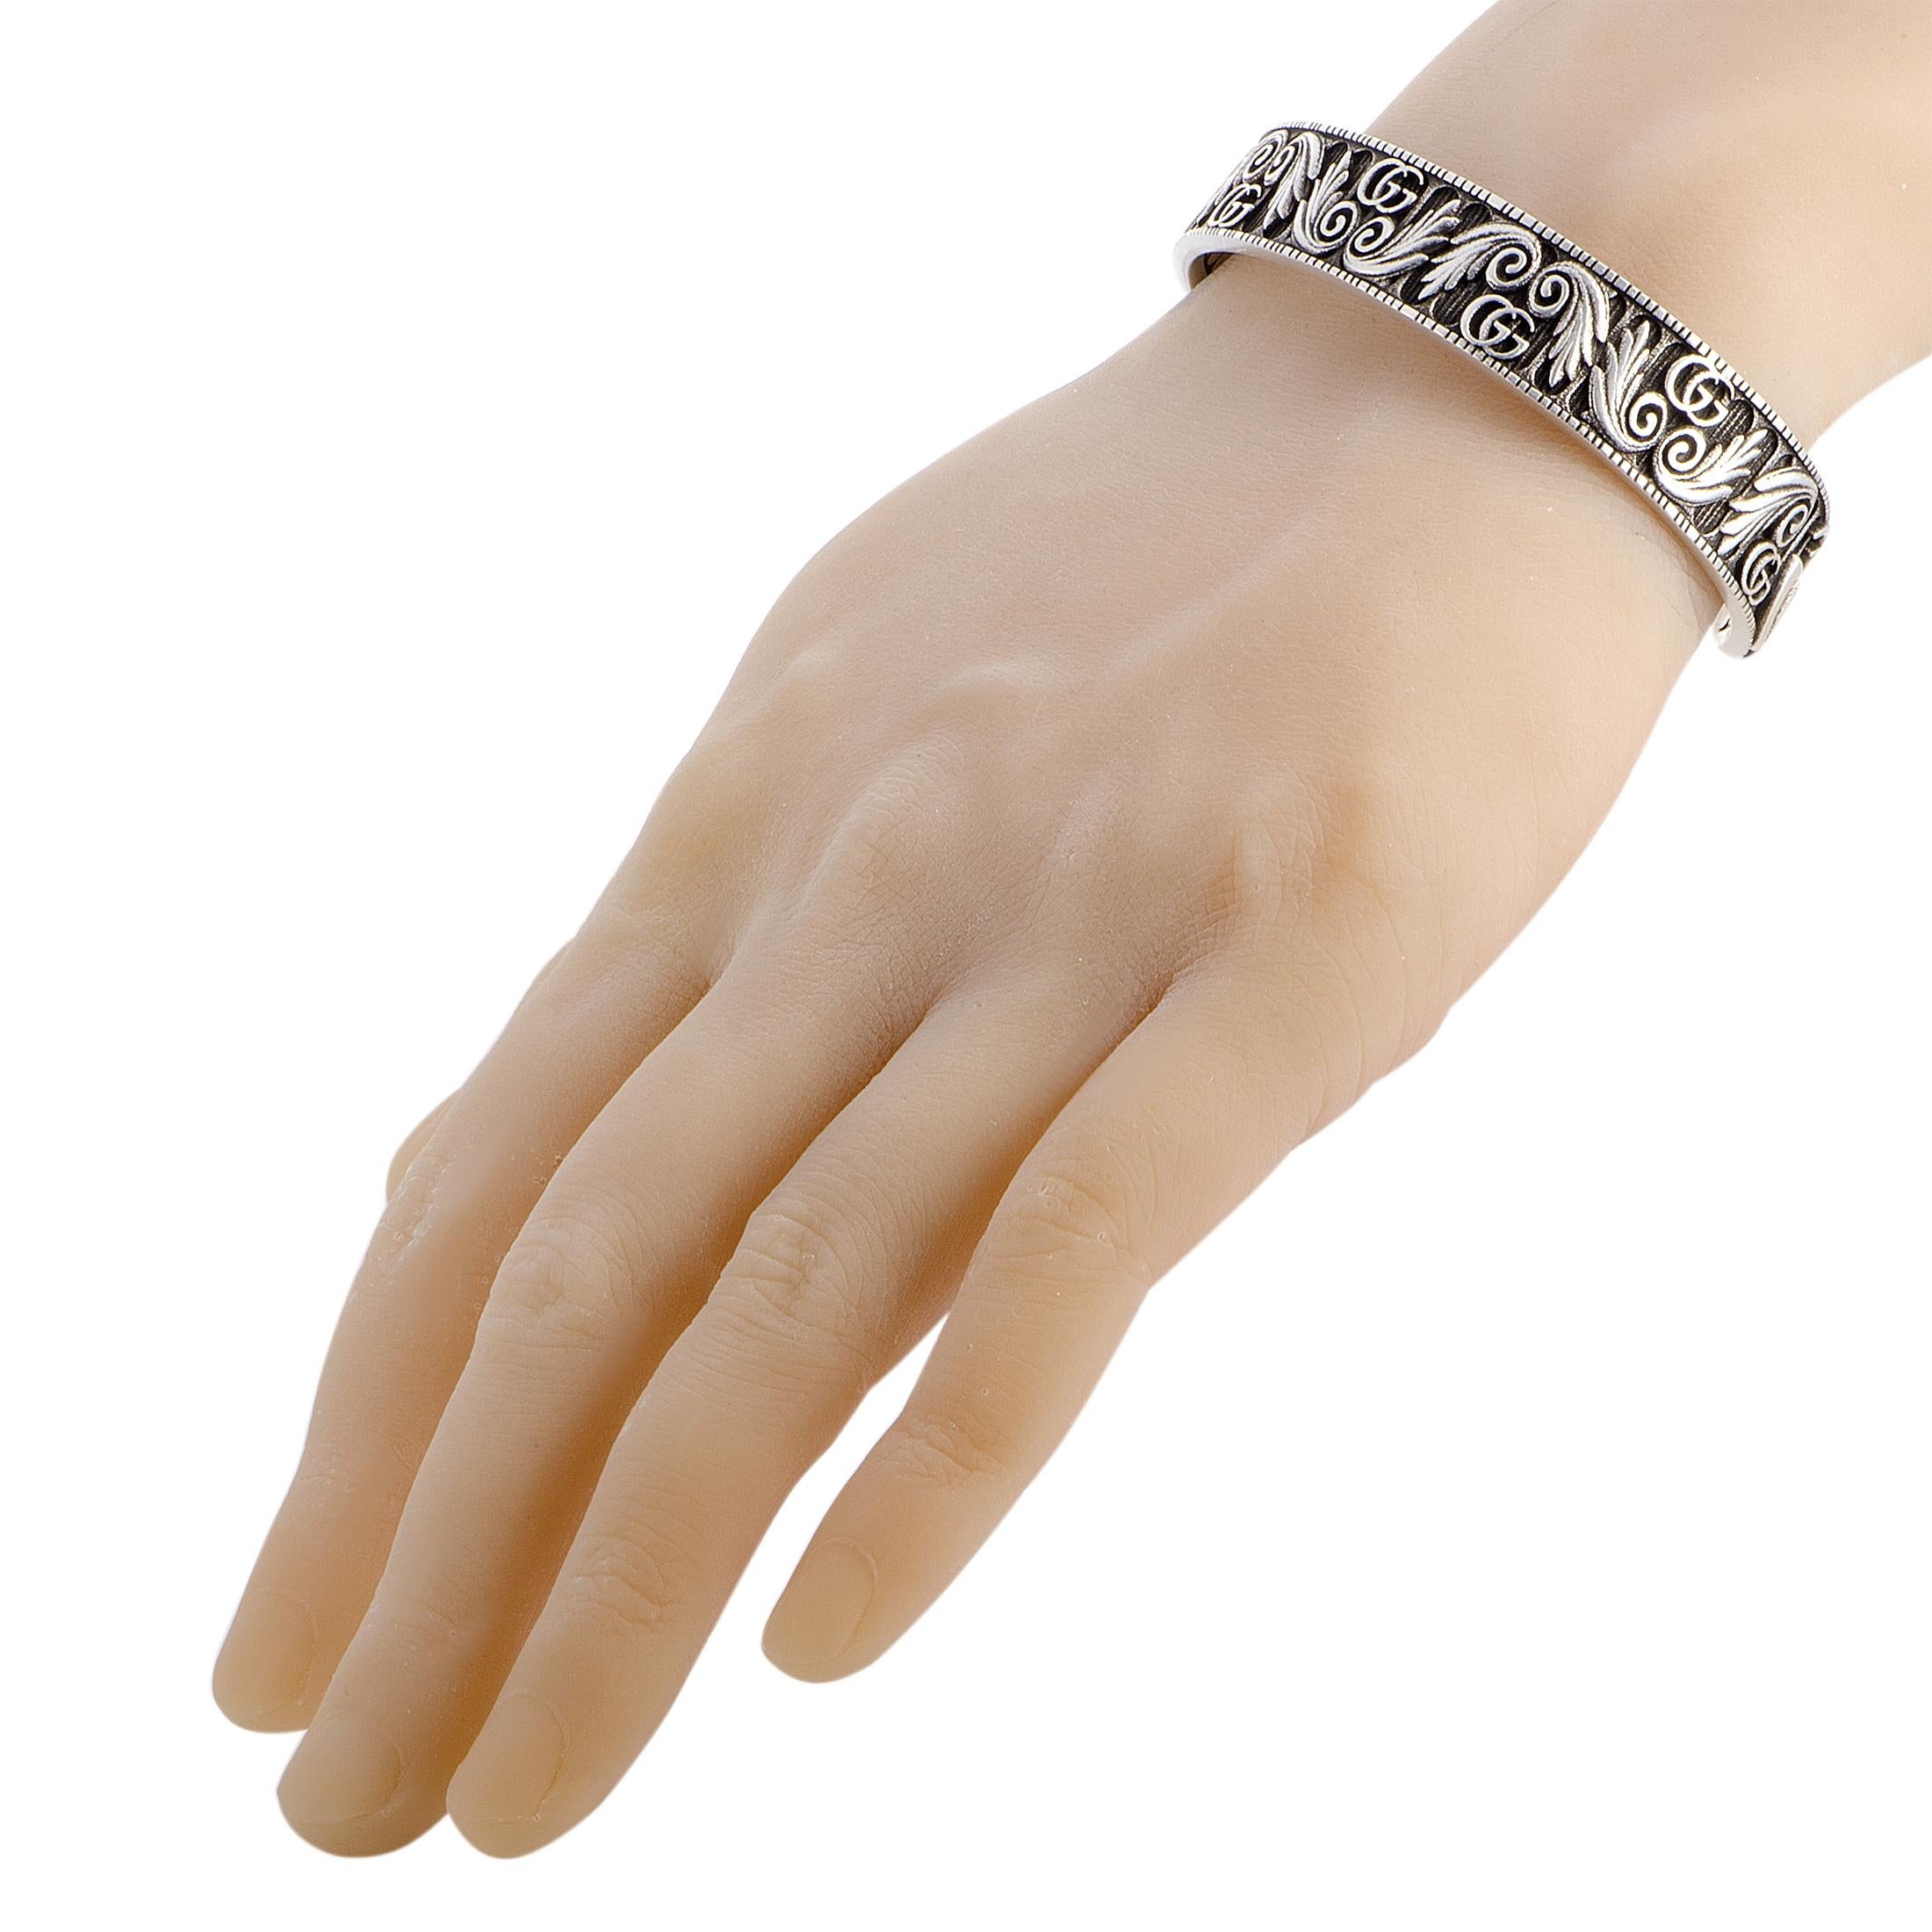 The Gucci “GG Marmont” bracelet is crafted from aged sterling silver and weighs 56 grams, measuring 8.30” in length and 2.65” in diameter.
 
 The bracelet is offered in brand new condition.
